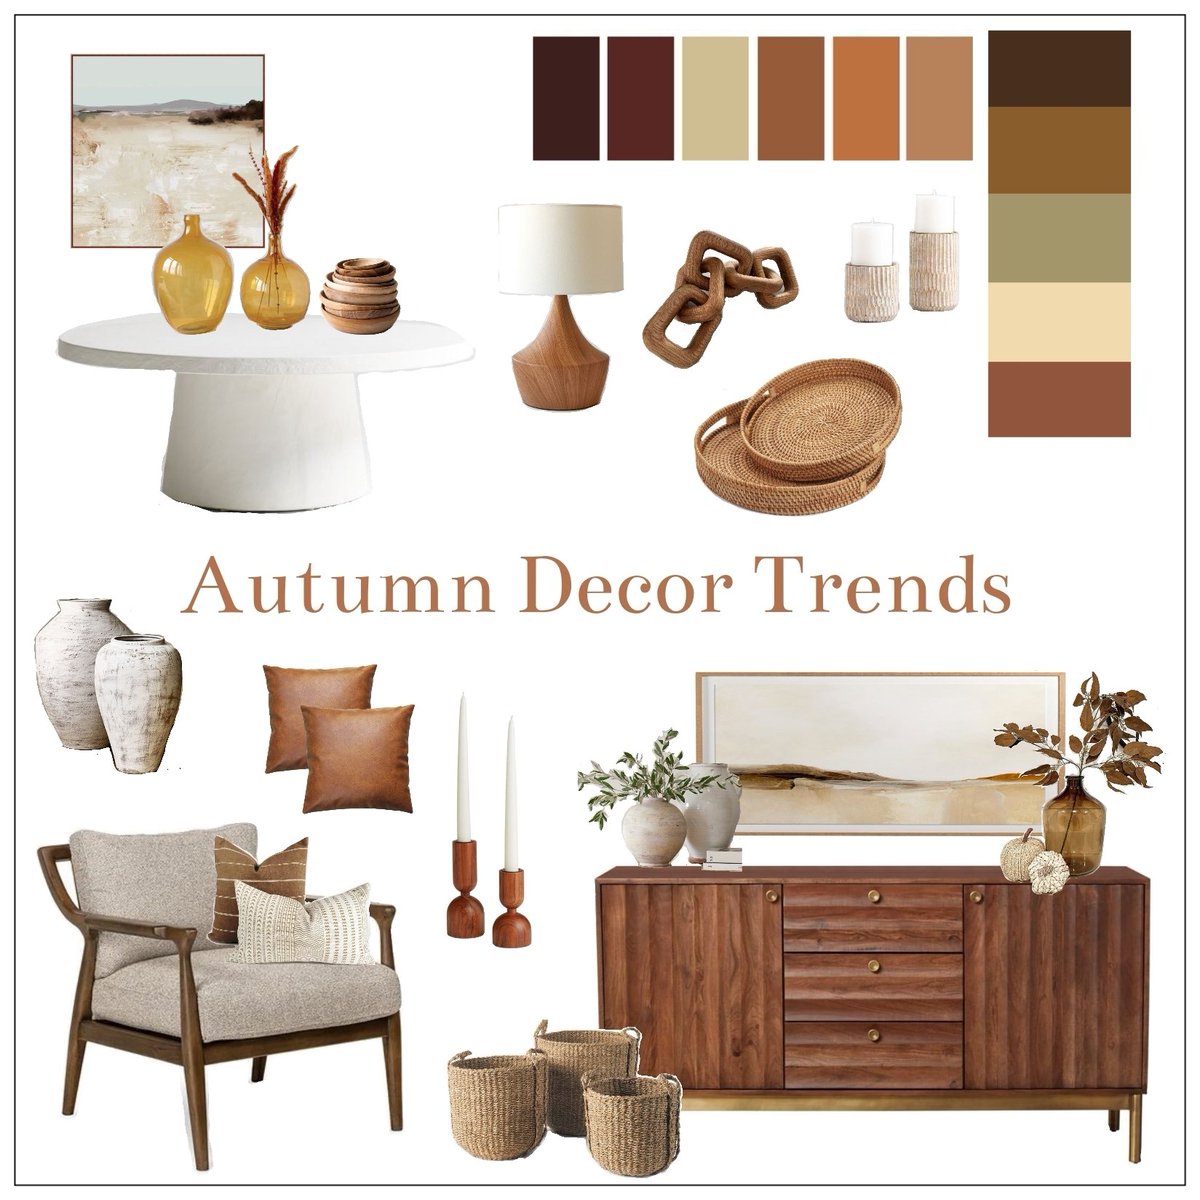 Designing, decorating, curating, styling...Autumn Decor Trends 🍂🍁.
.
.
#design #interiordesign #decor #decorating #inspirationboard #creatingspaces #foyerdesign #interior #homedecor #architecture #home #interiors #homedesign #interiordesigner #decoration #designer